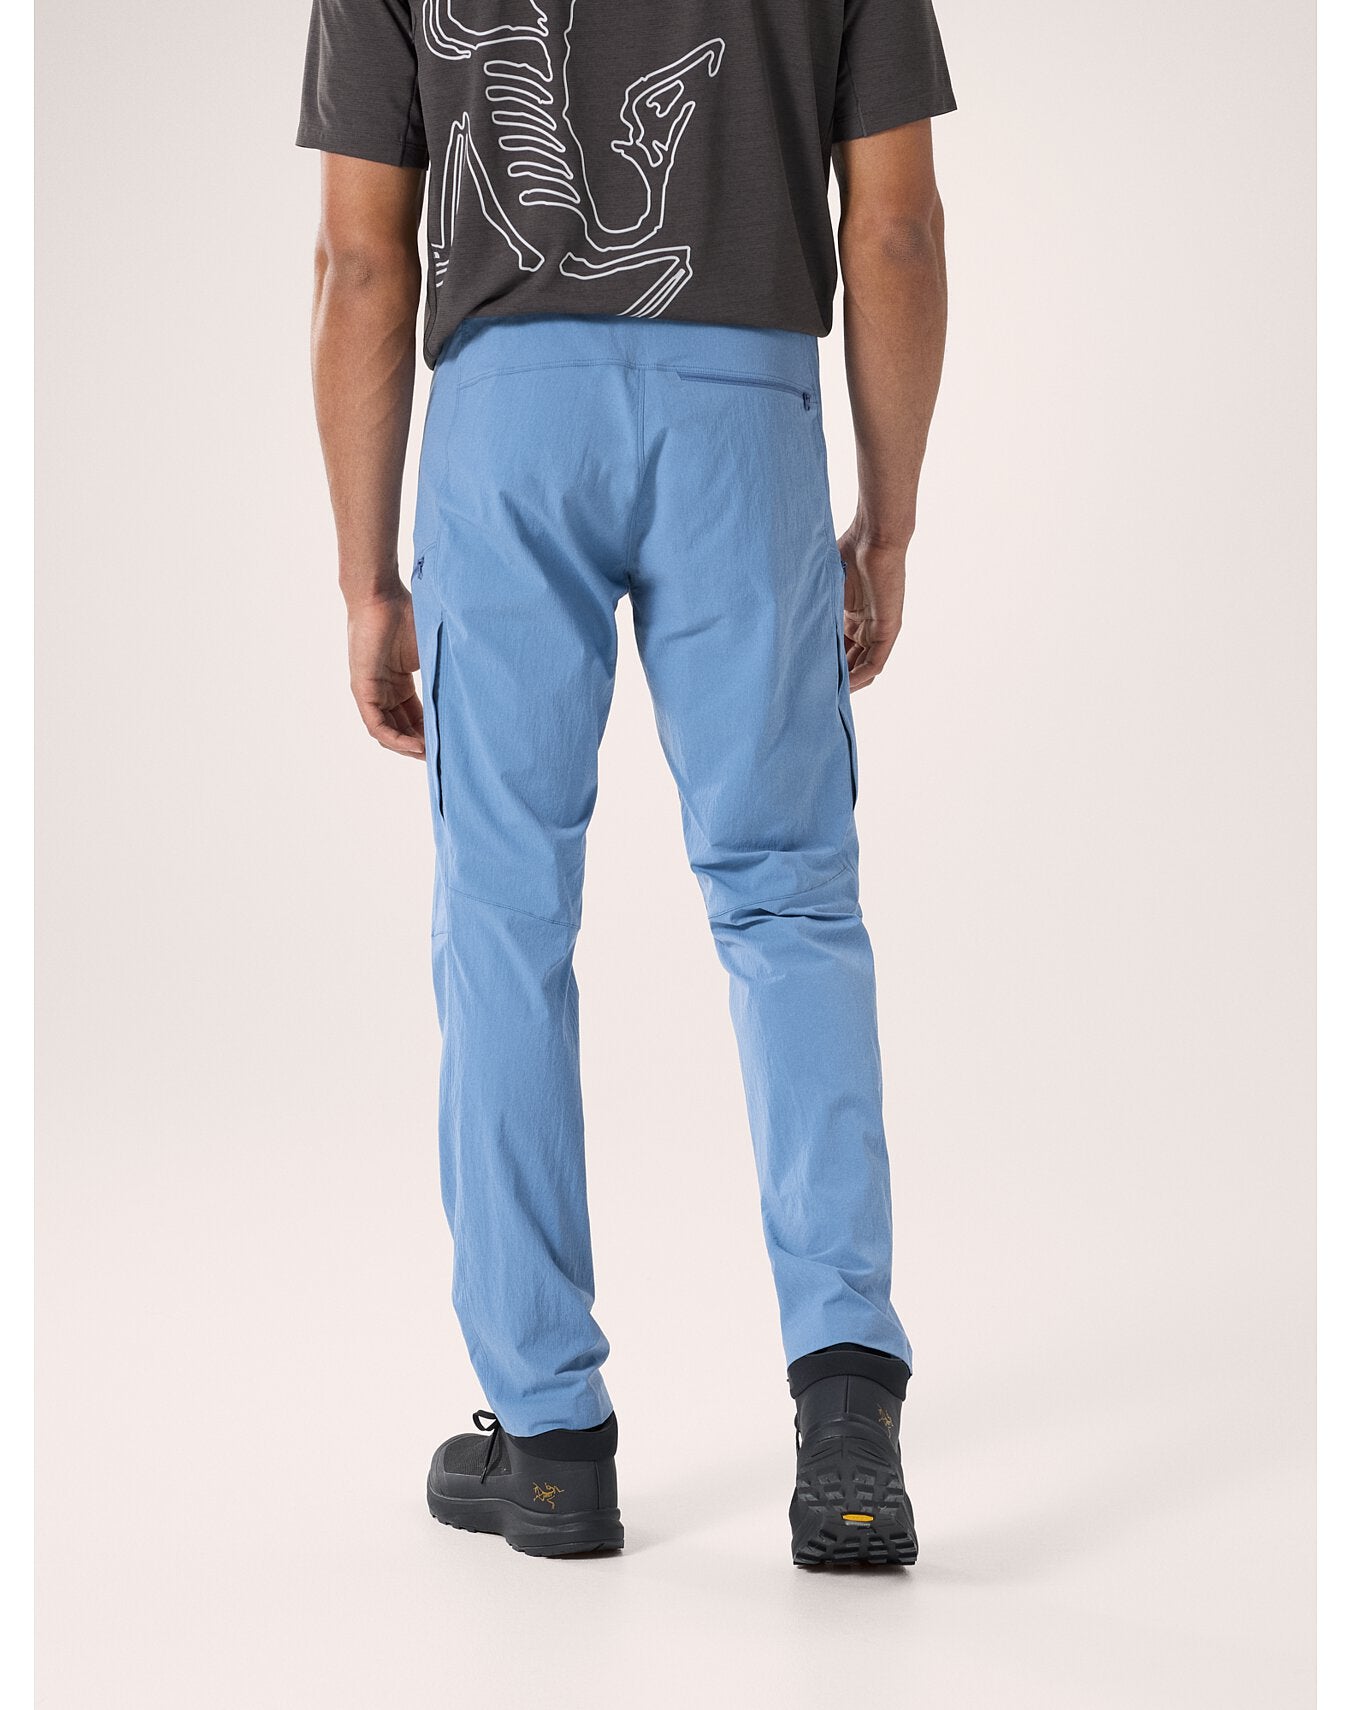 S24-X000007185-Gamma-Quick-Dry-Pant-Stone-Wash-Back-View.jpg